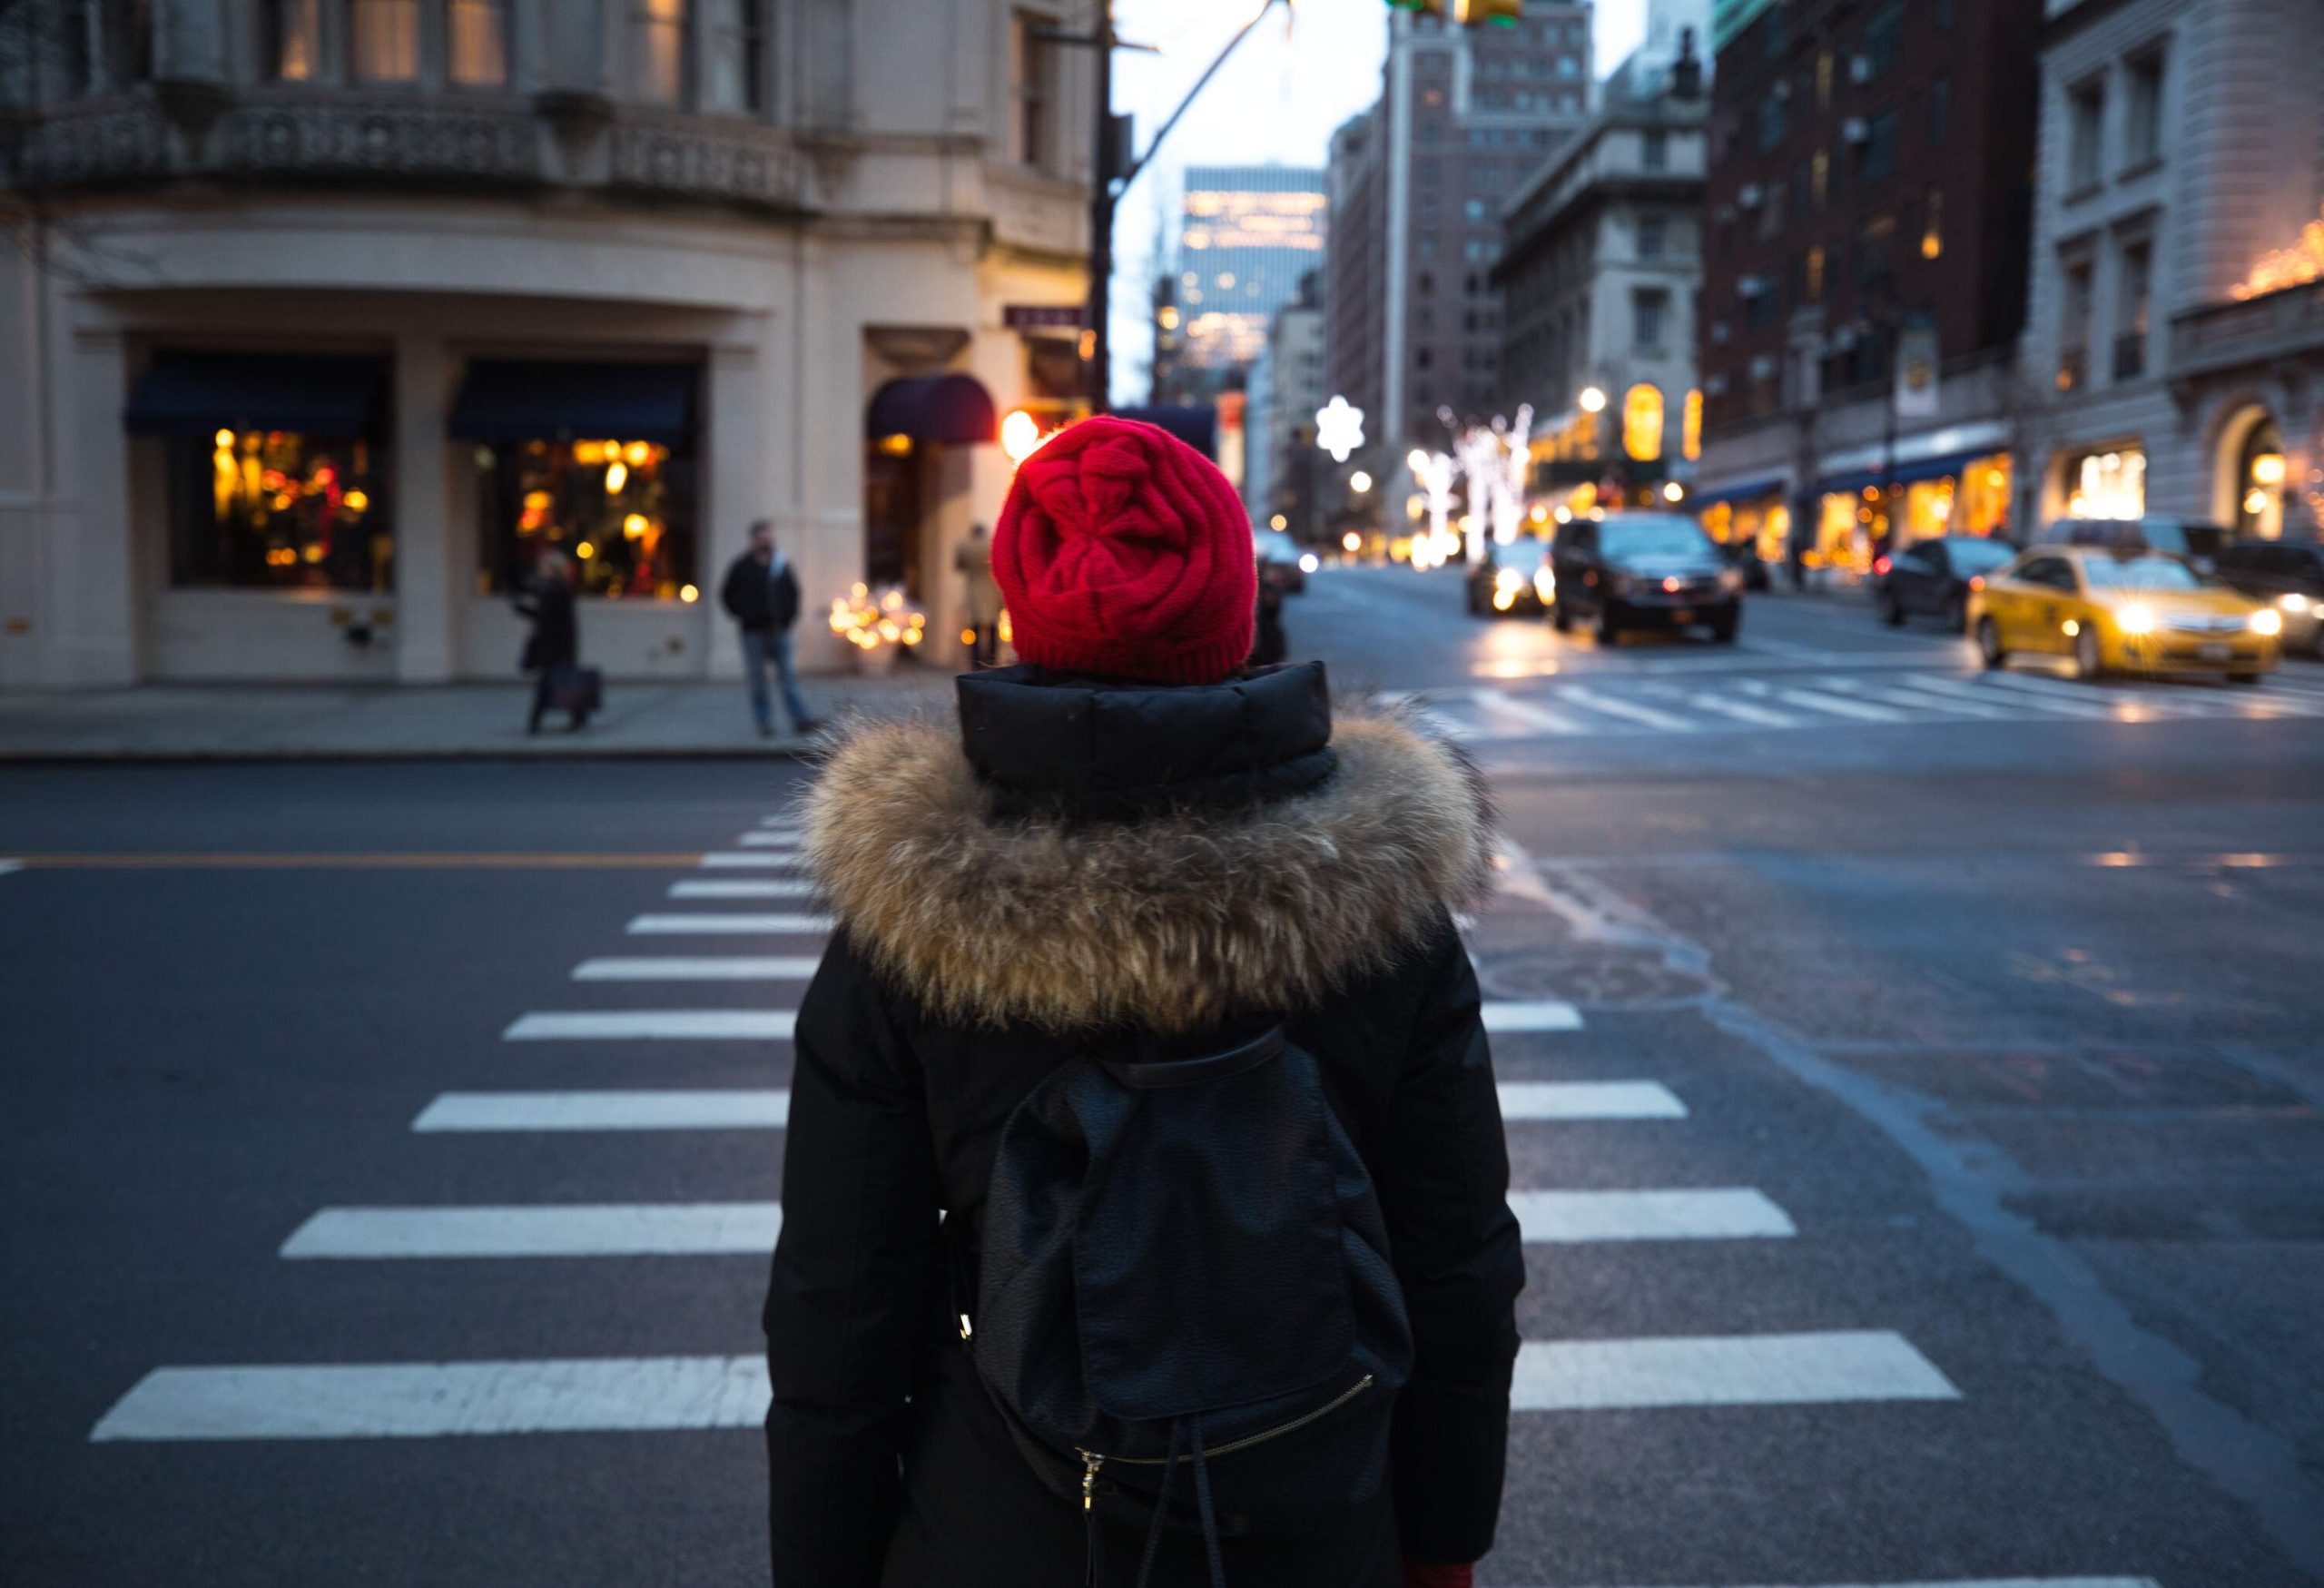 A person in a red bonnet, black fur coat, and bag stands in front of a crosswalk.